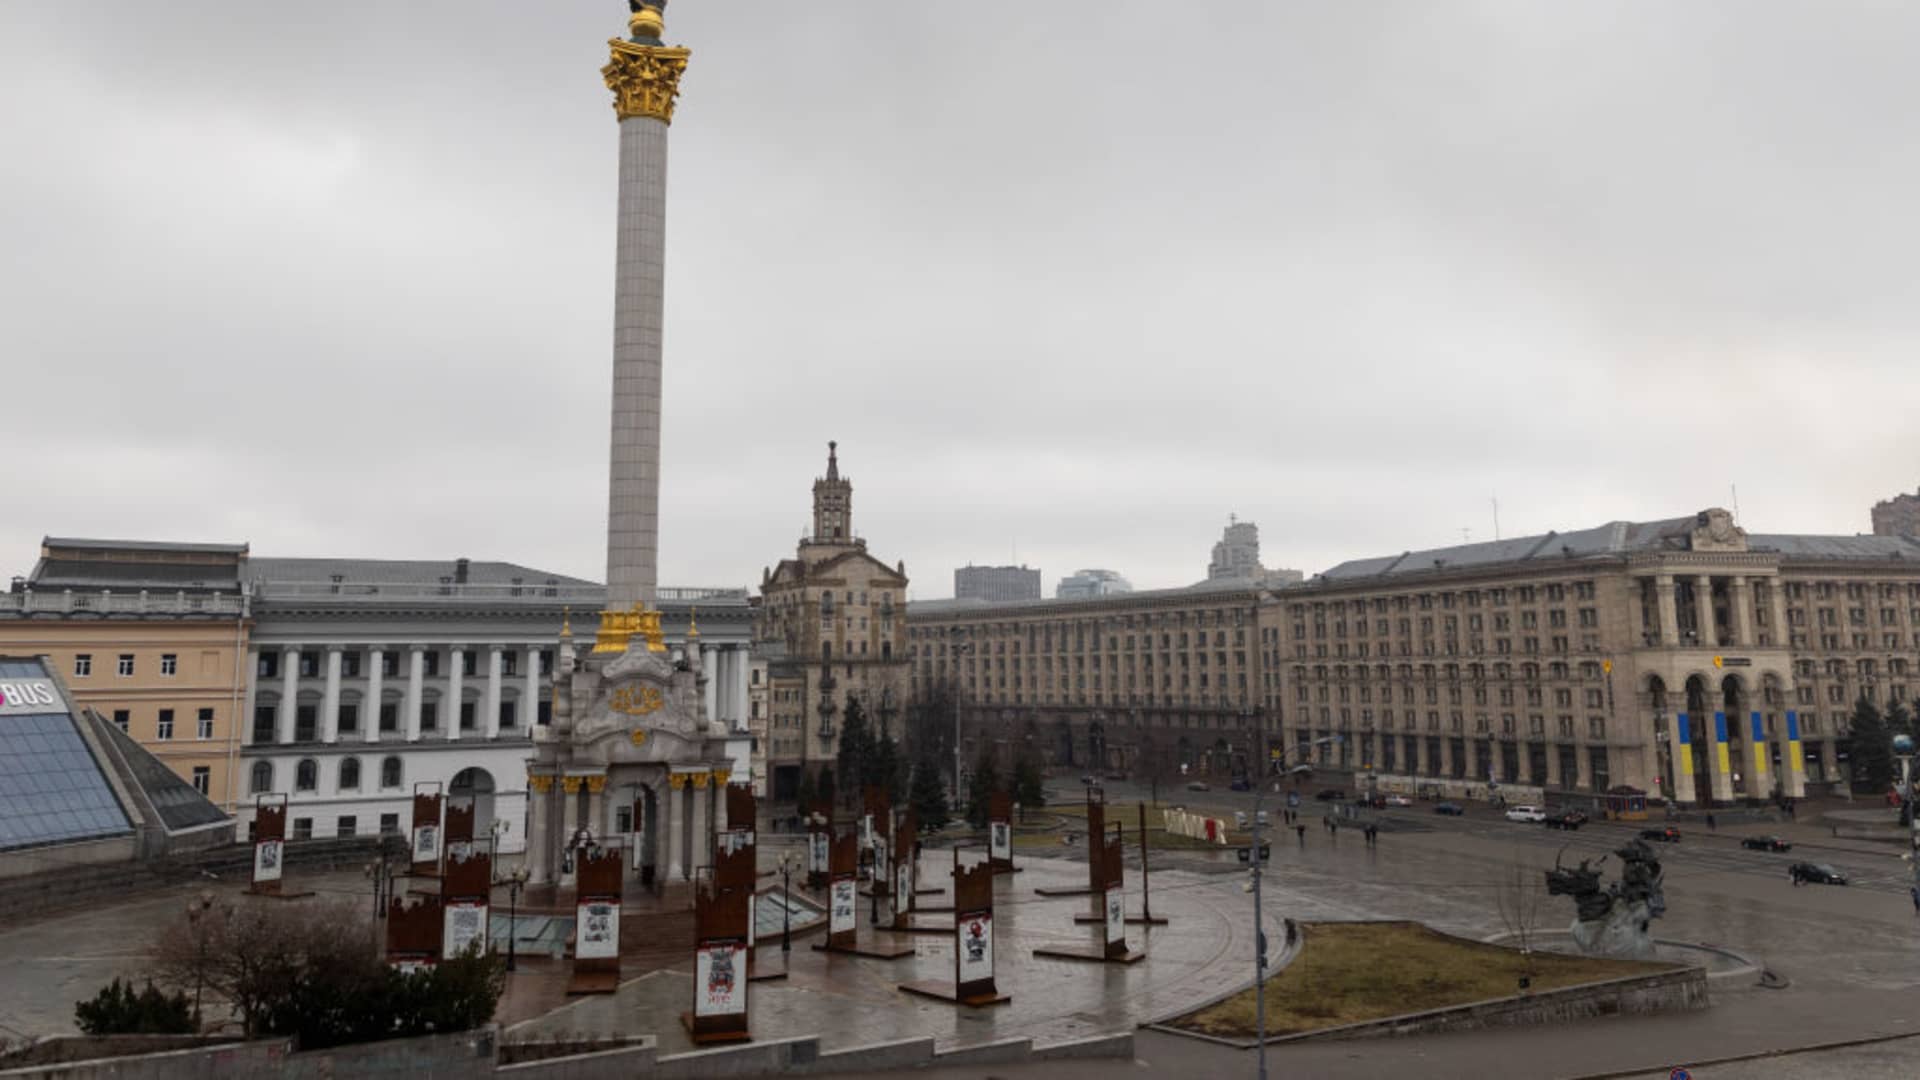 A general view of a near empty Independence Square on February 24, 2022 in Kyiv, Ukraine. Overnight, Russia began a large-scale attack on Ukraine, with explosions reported in multiple cities and far outside the restive eastern regions held by Russian-backed rebels.